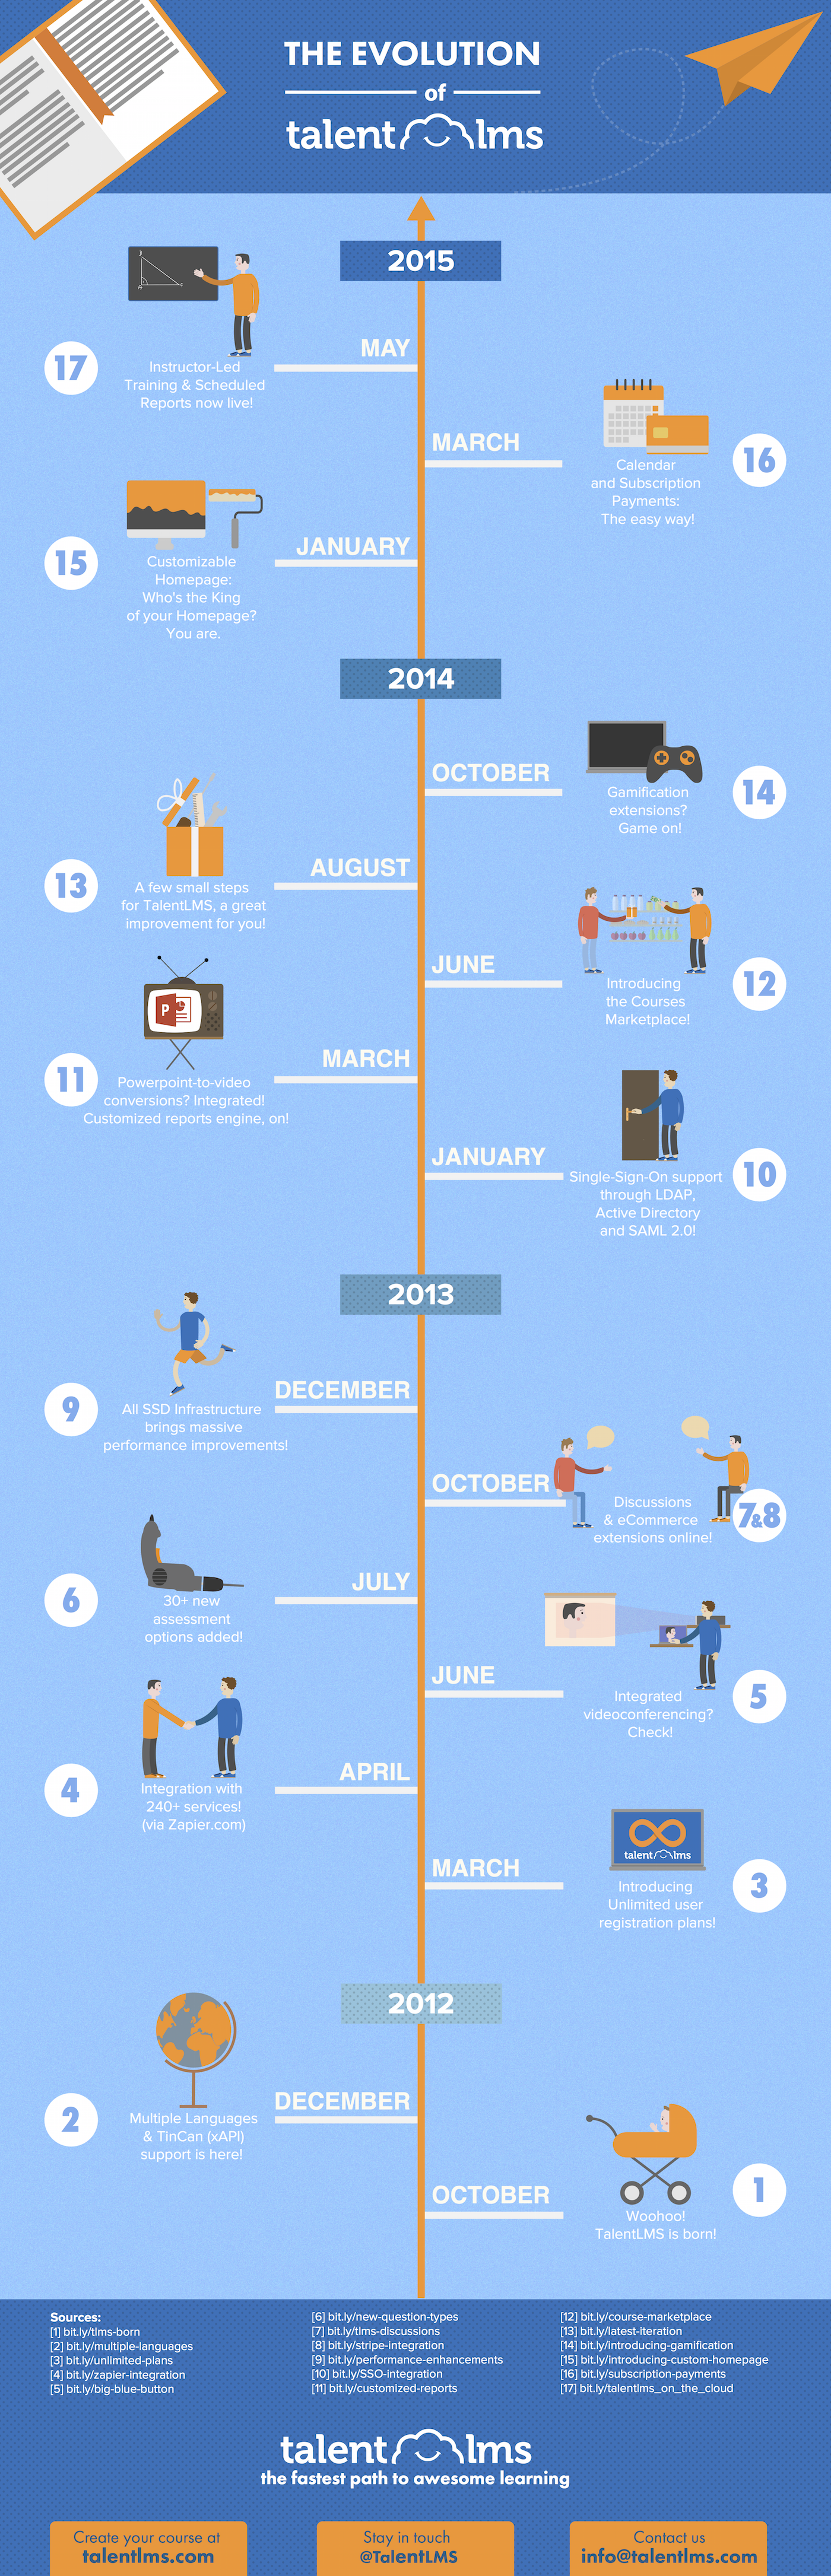 the-evolution-of-talentlms-infographic